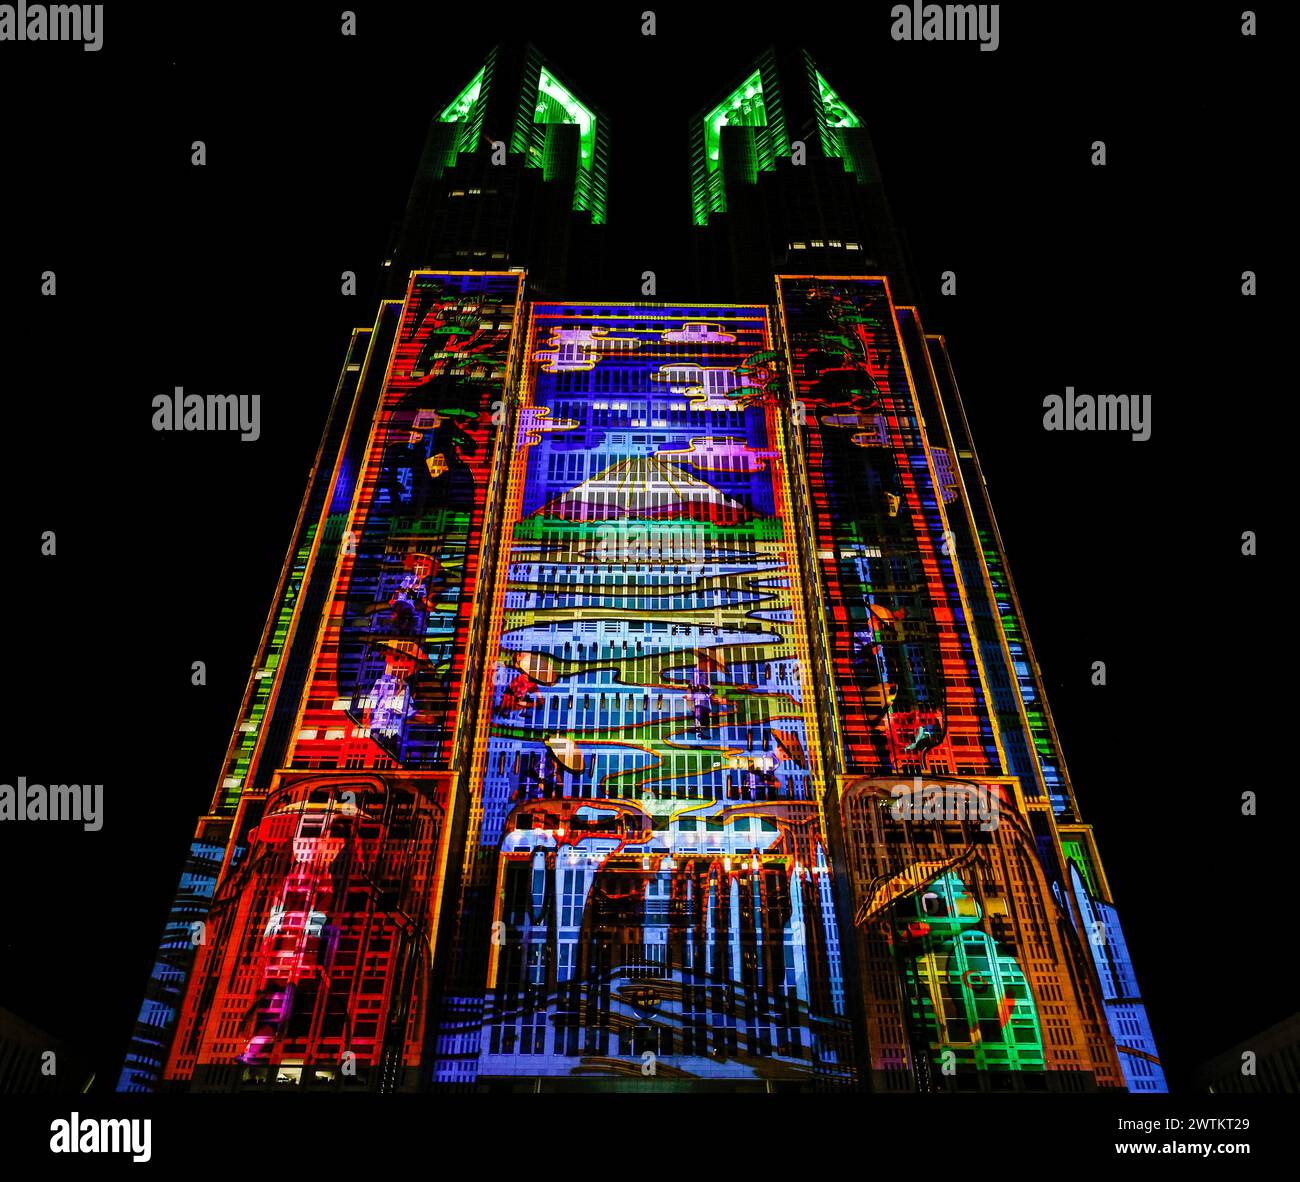 WORLD LARGEST PROJECTION MAPPING SHOW IN SHINJUKU TOKYO Stock Photo